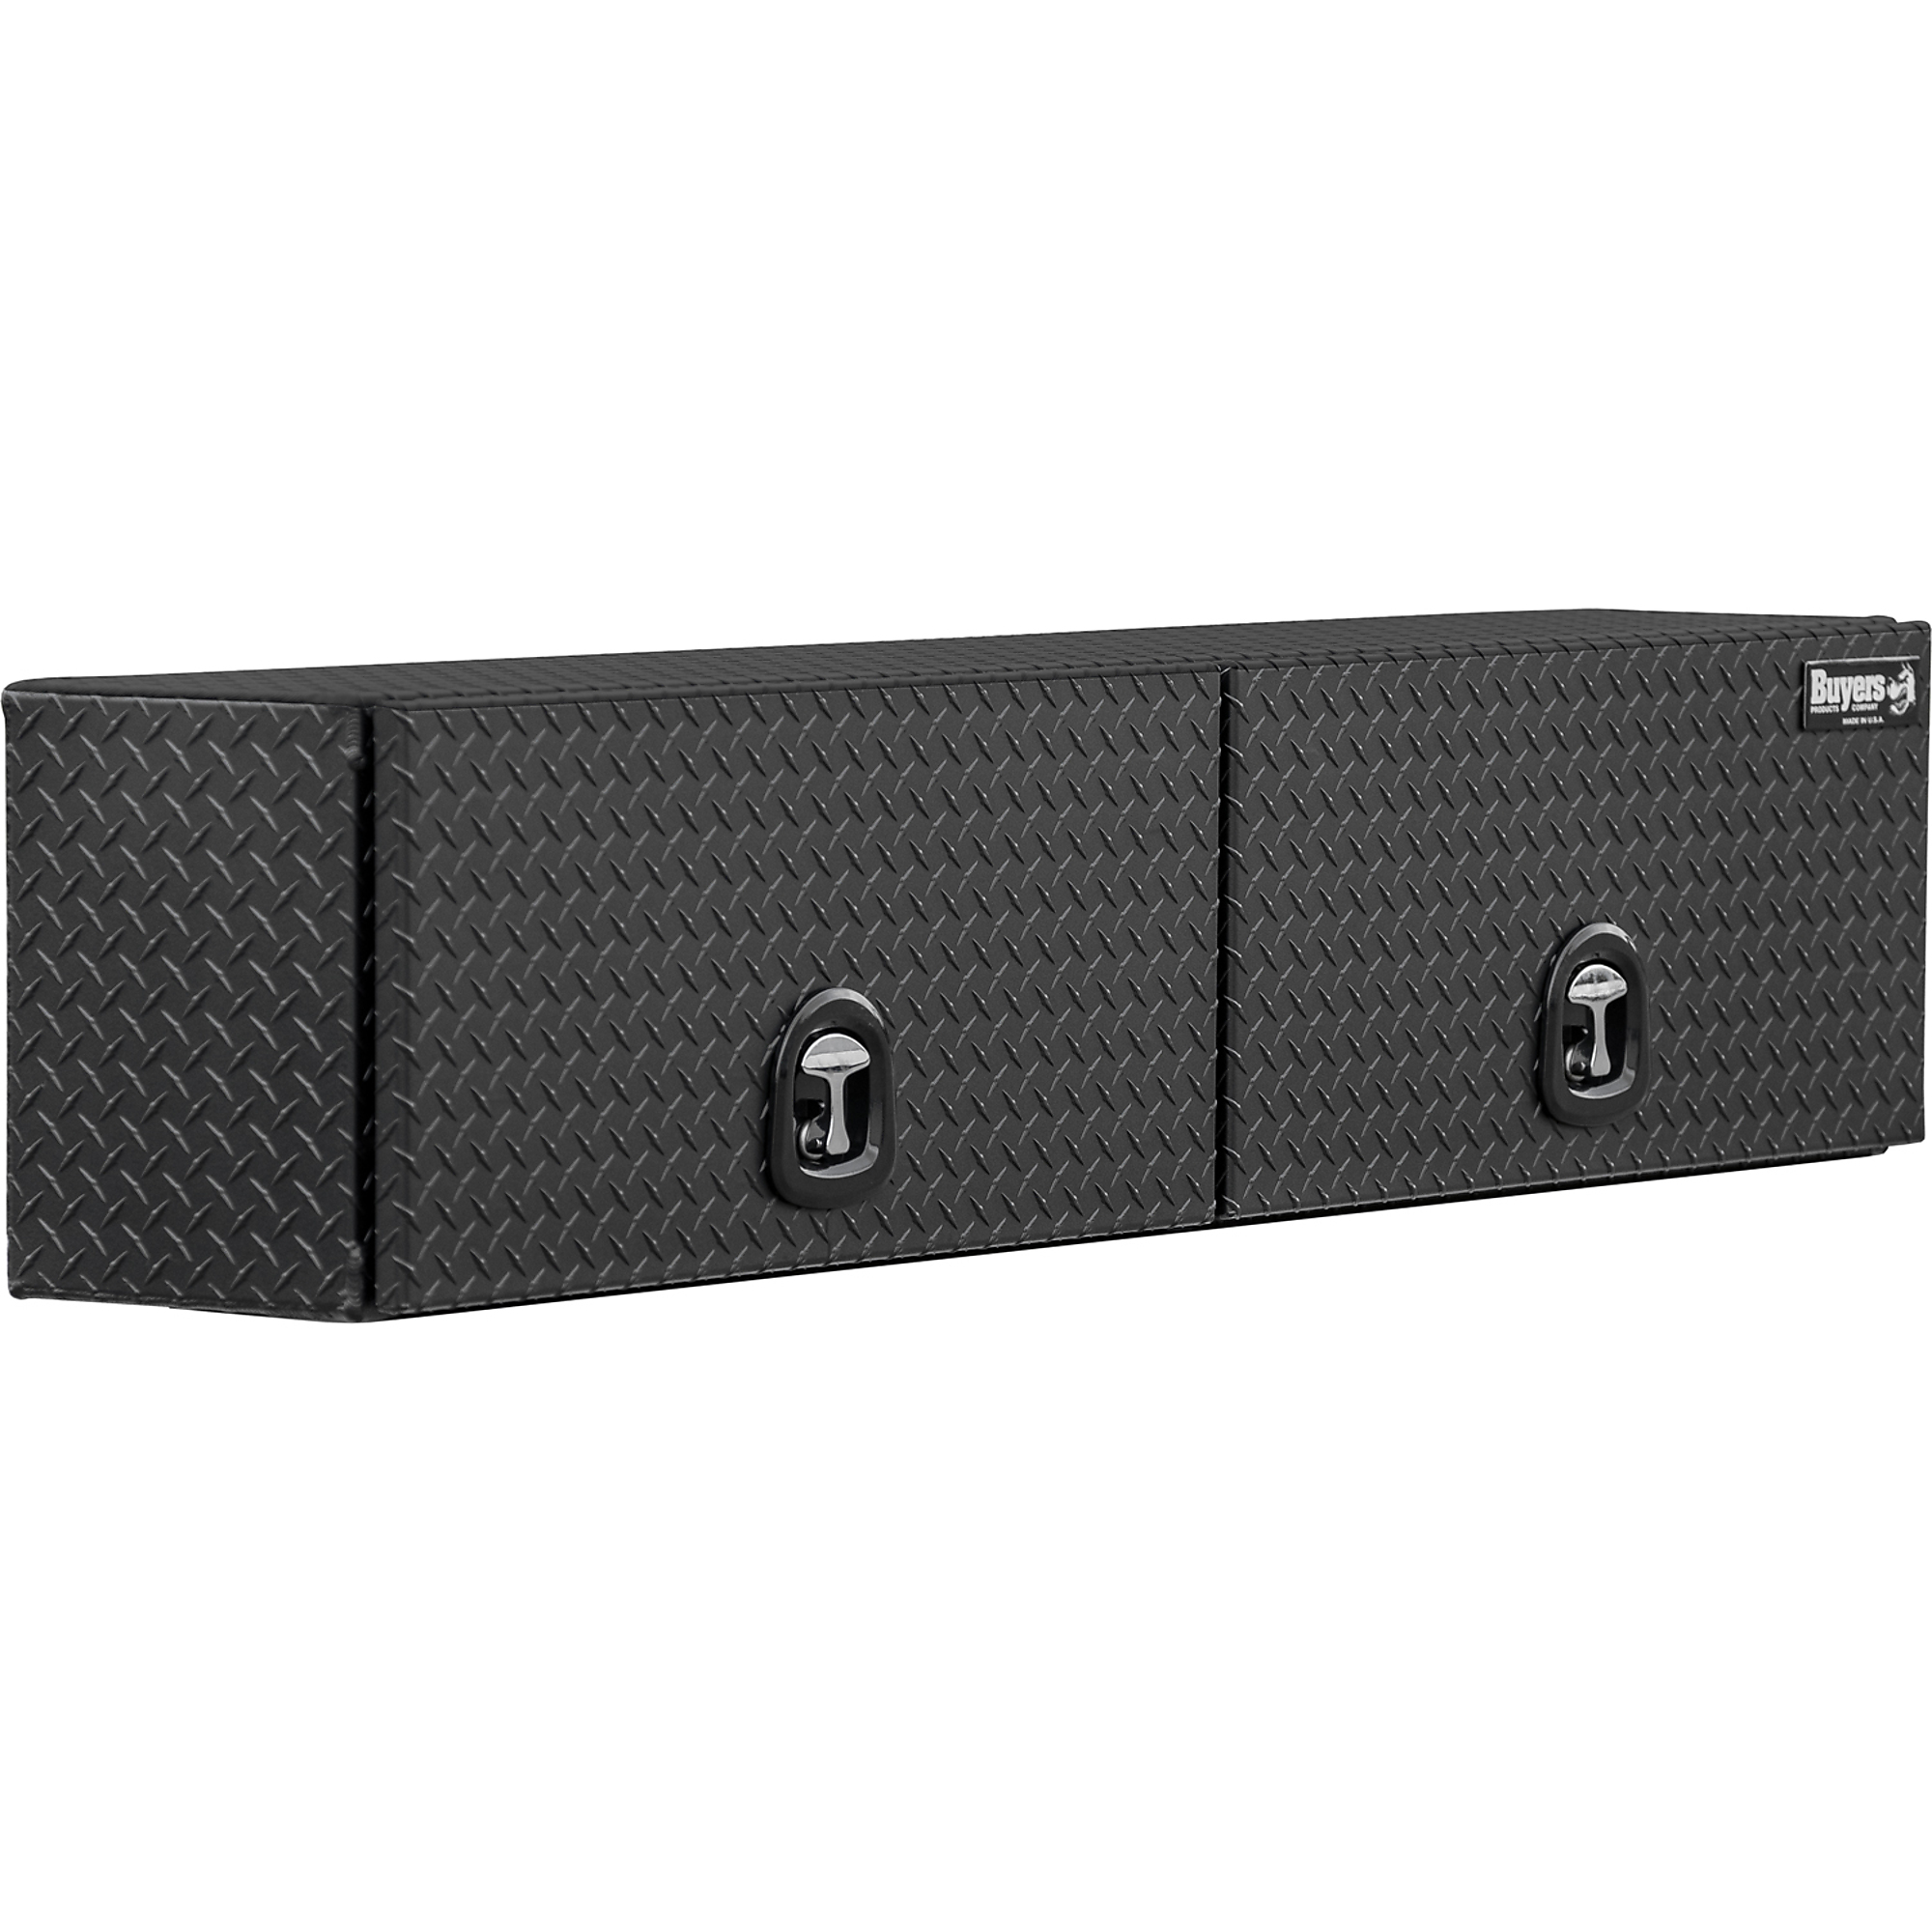 Buyers Products, 18x16x72 Matte Black Aluminum Topsider, Width 18 in, Material Aluminum, Color Finish Diamond Plate Matte Black, Model 1722363